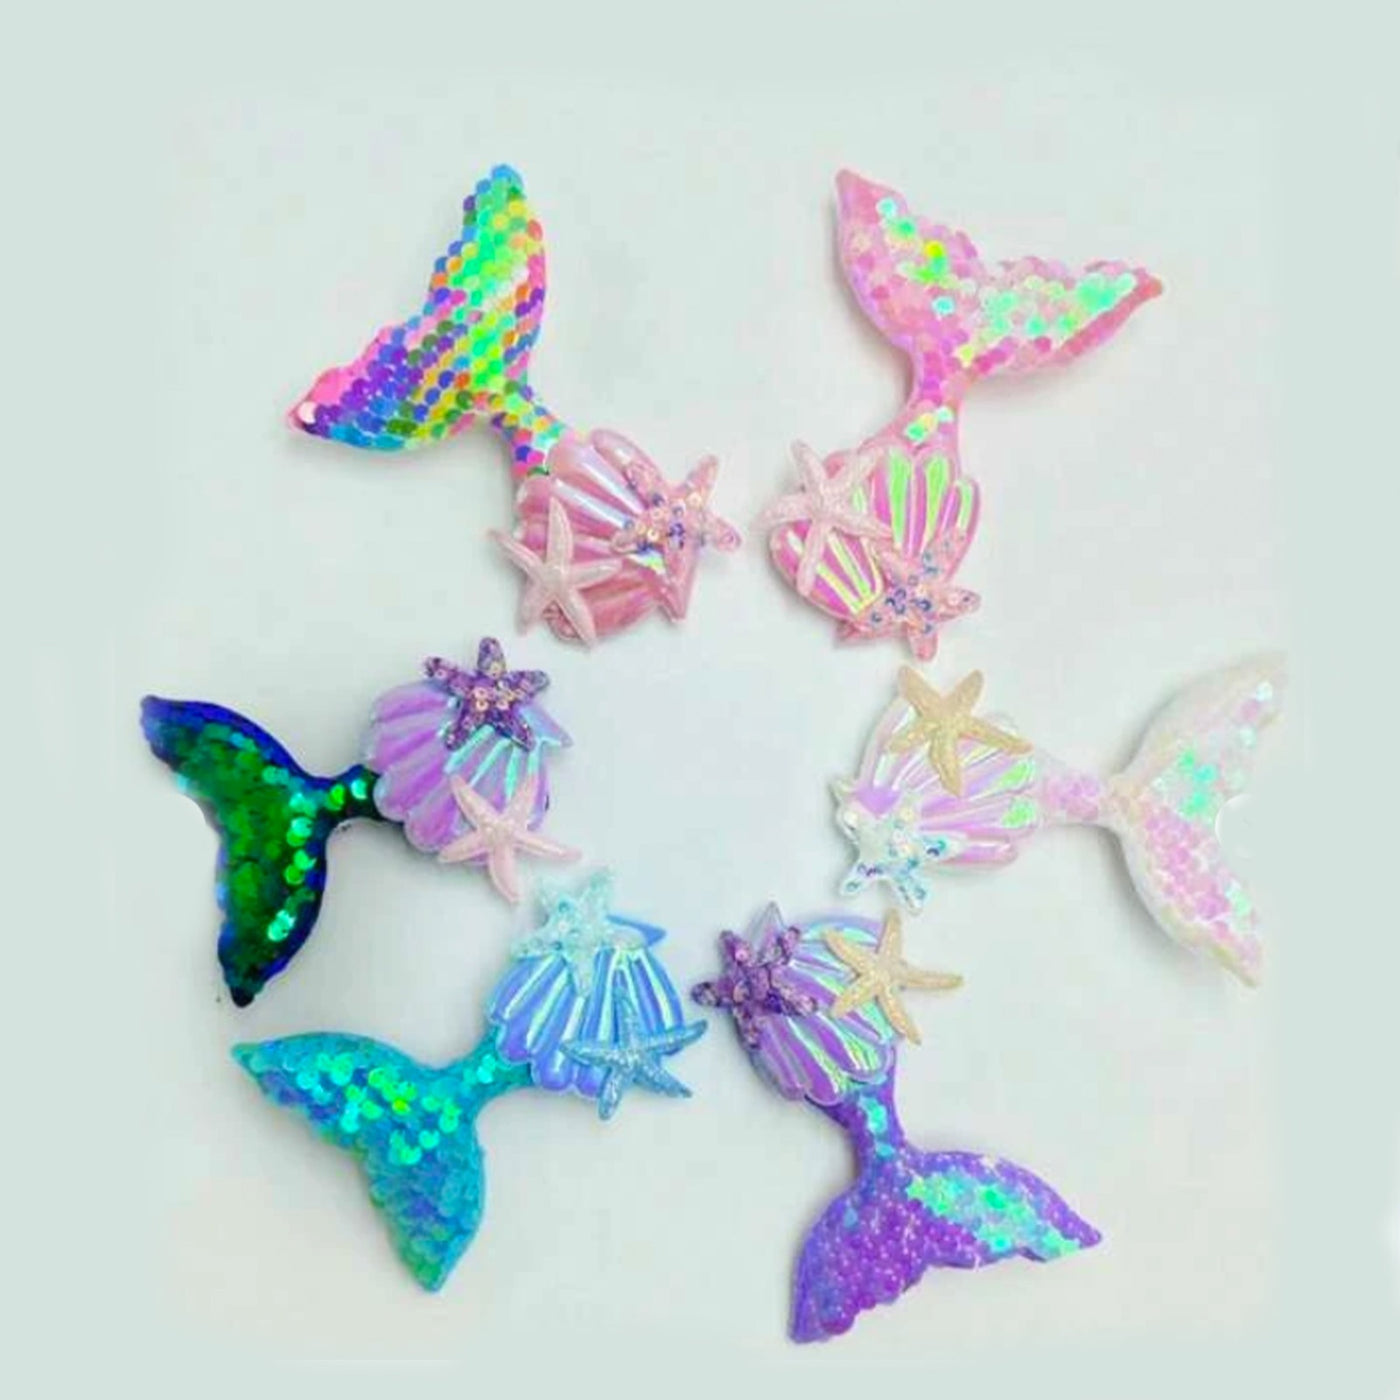 Ready Made Mermaid Party Favours With Toys And Sweets For Girls.